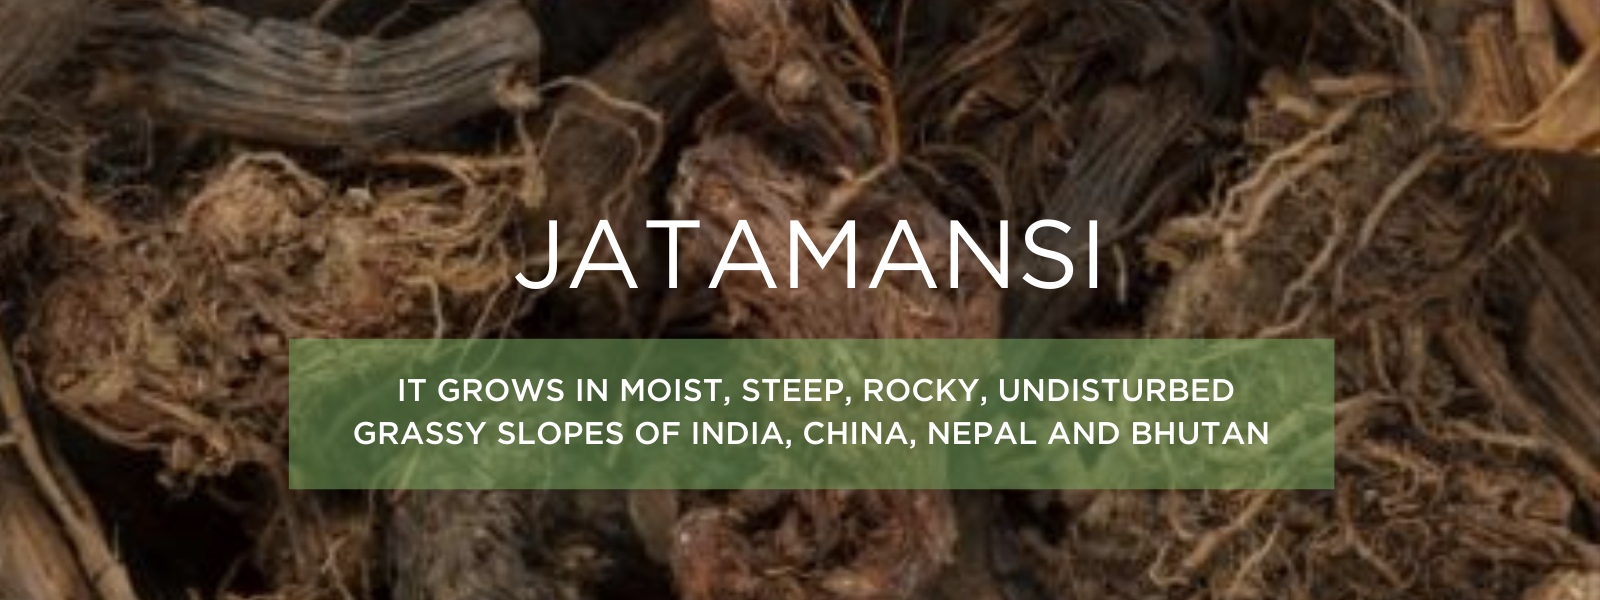 Jatamansi- Health Benefits, Uses and Important Facts